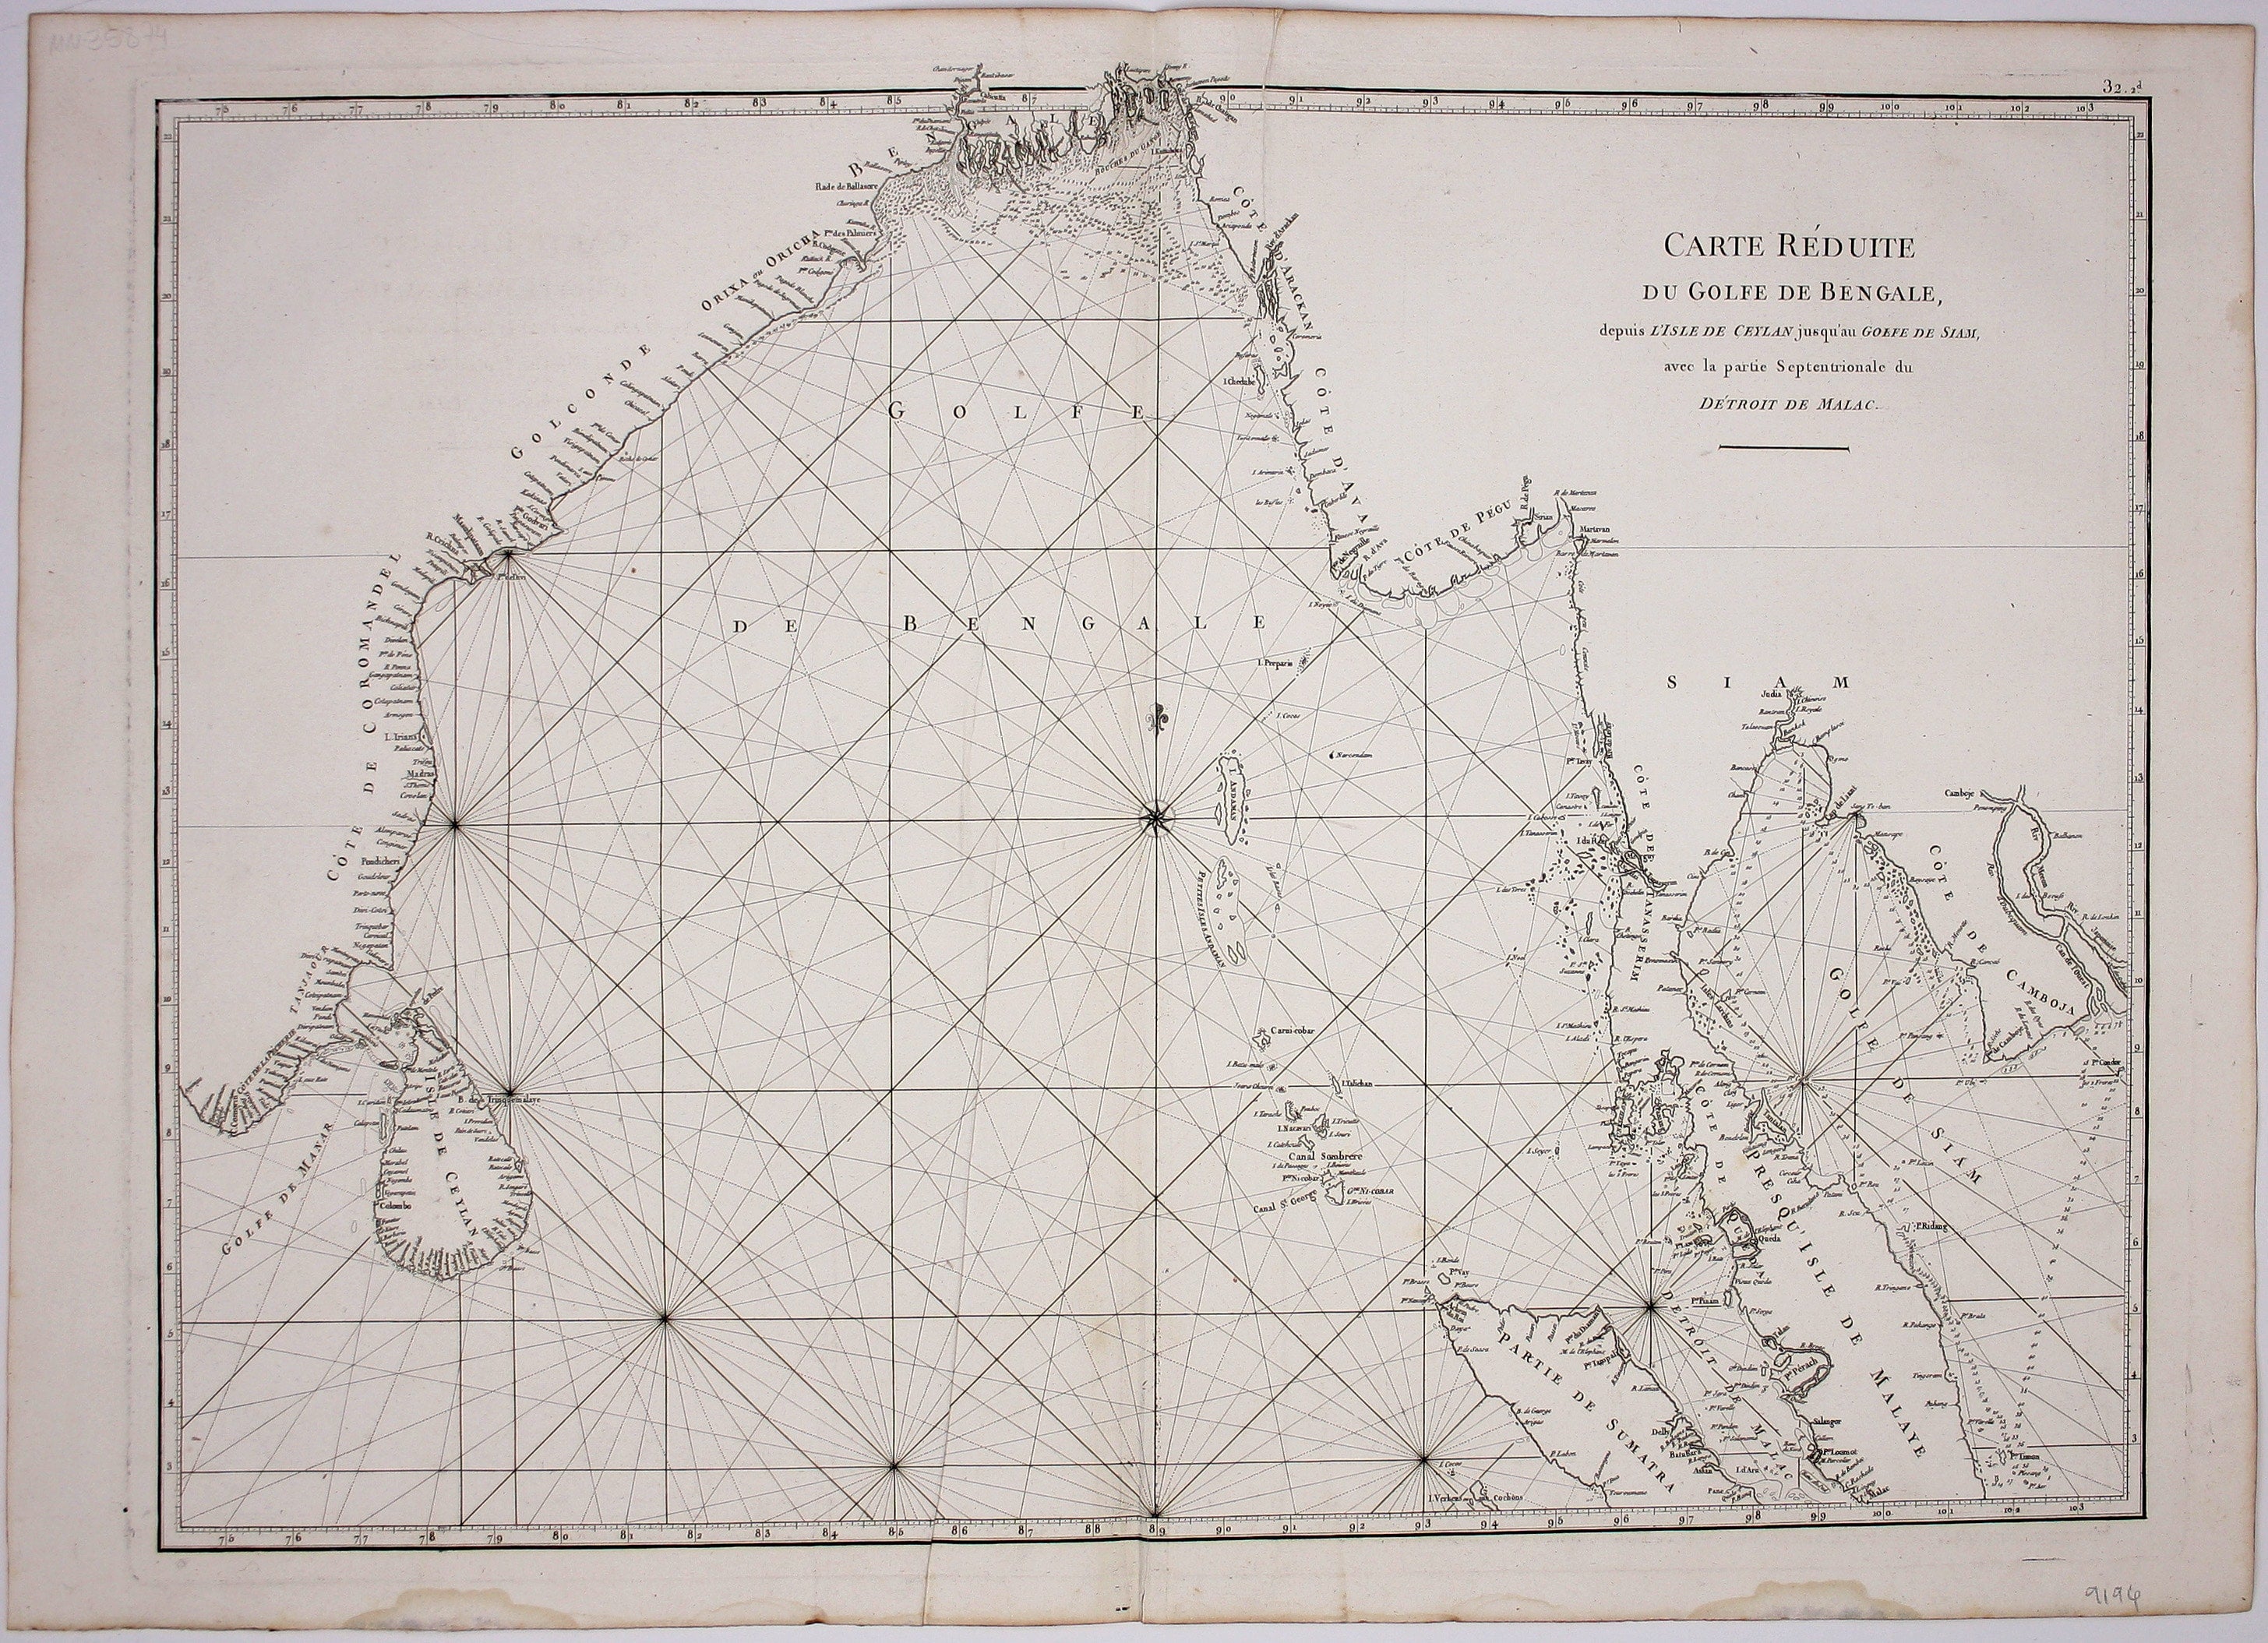 Mannevillette’s Chart of the Bay of Bengal